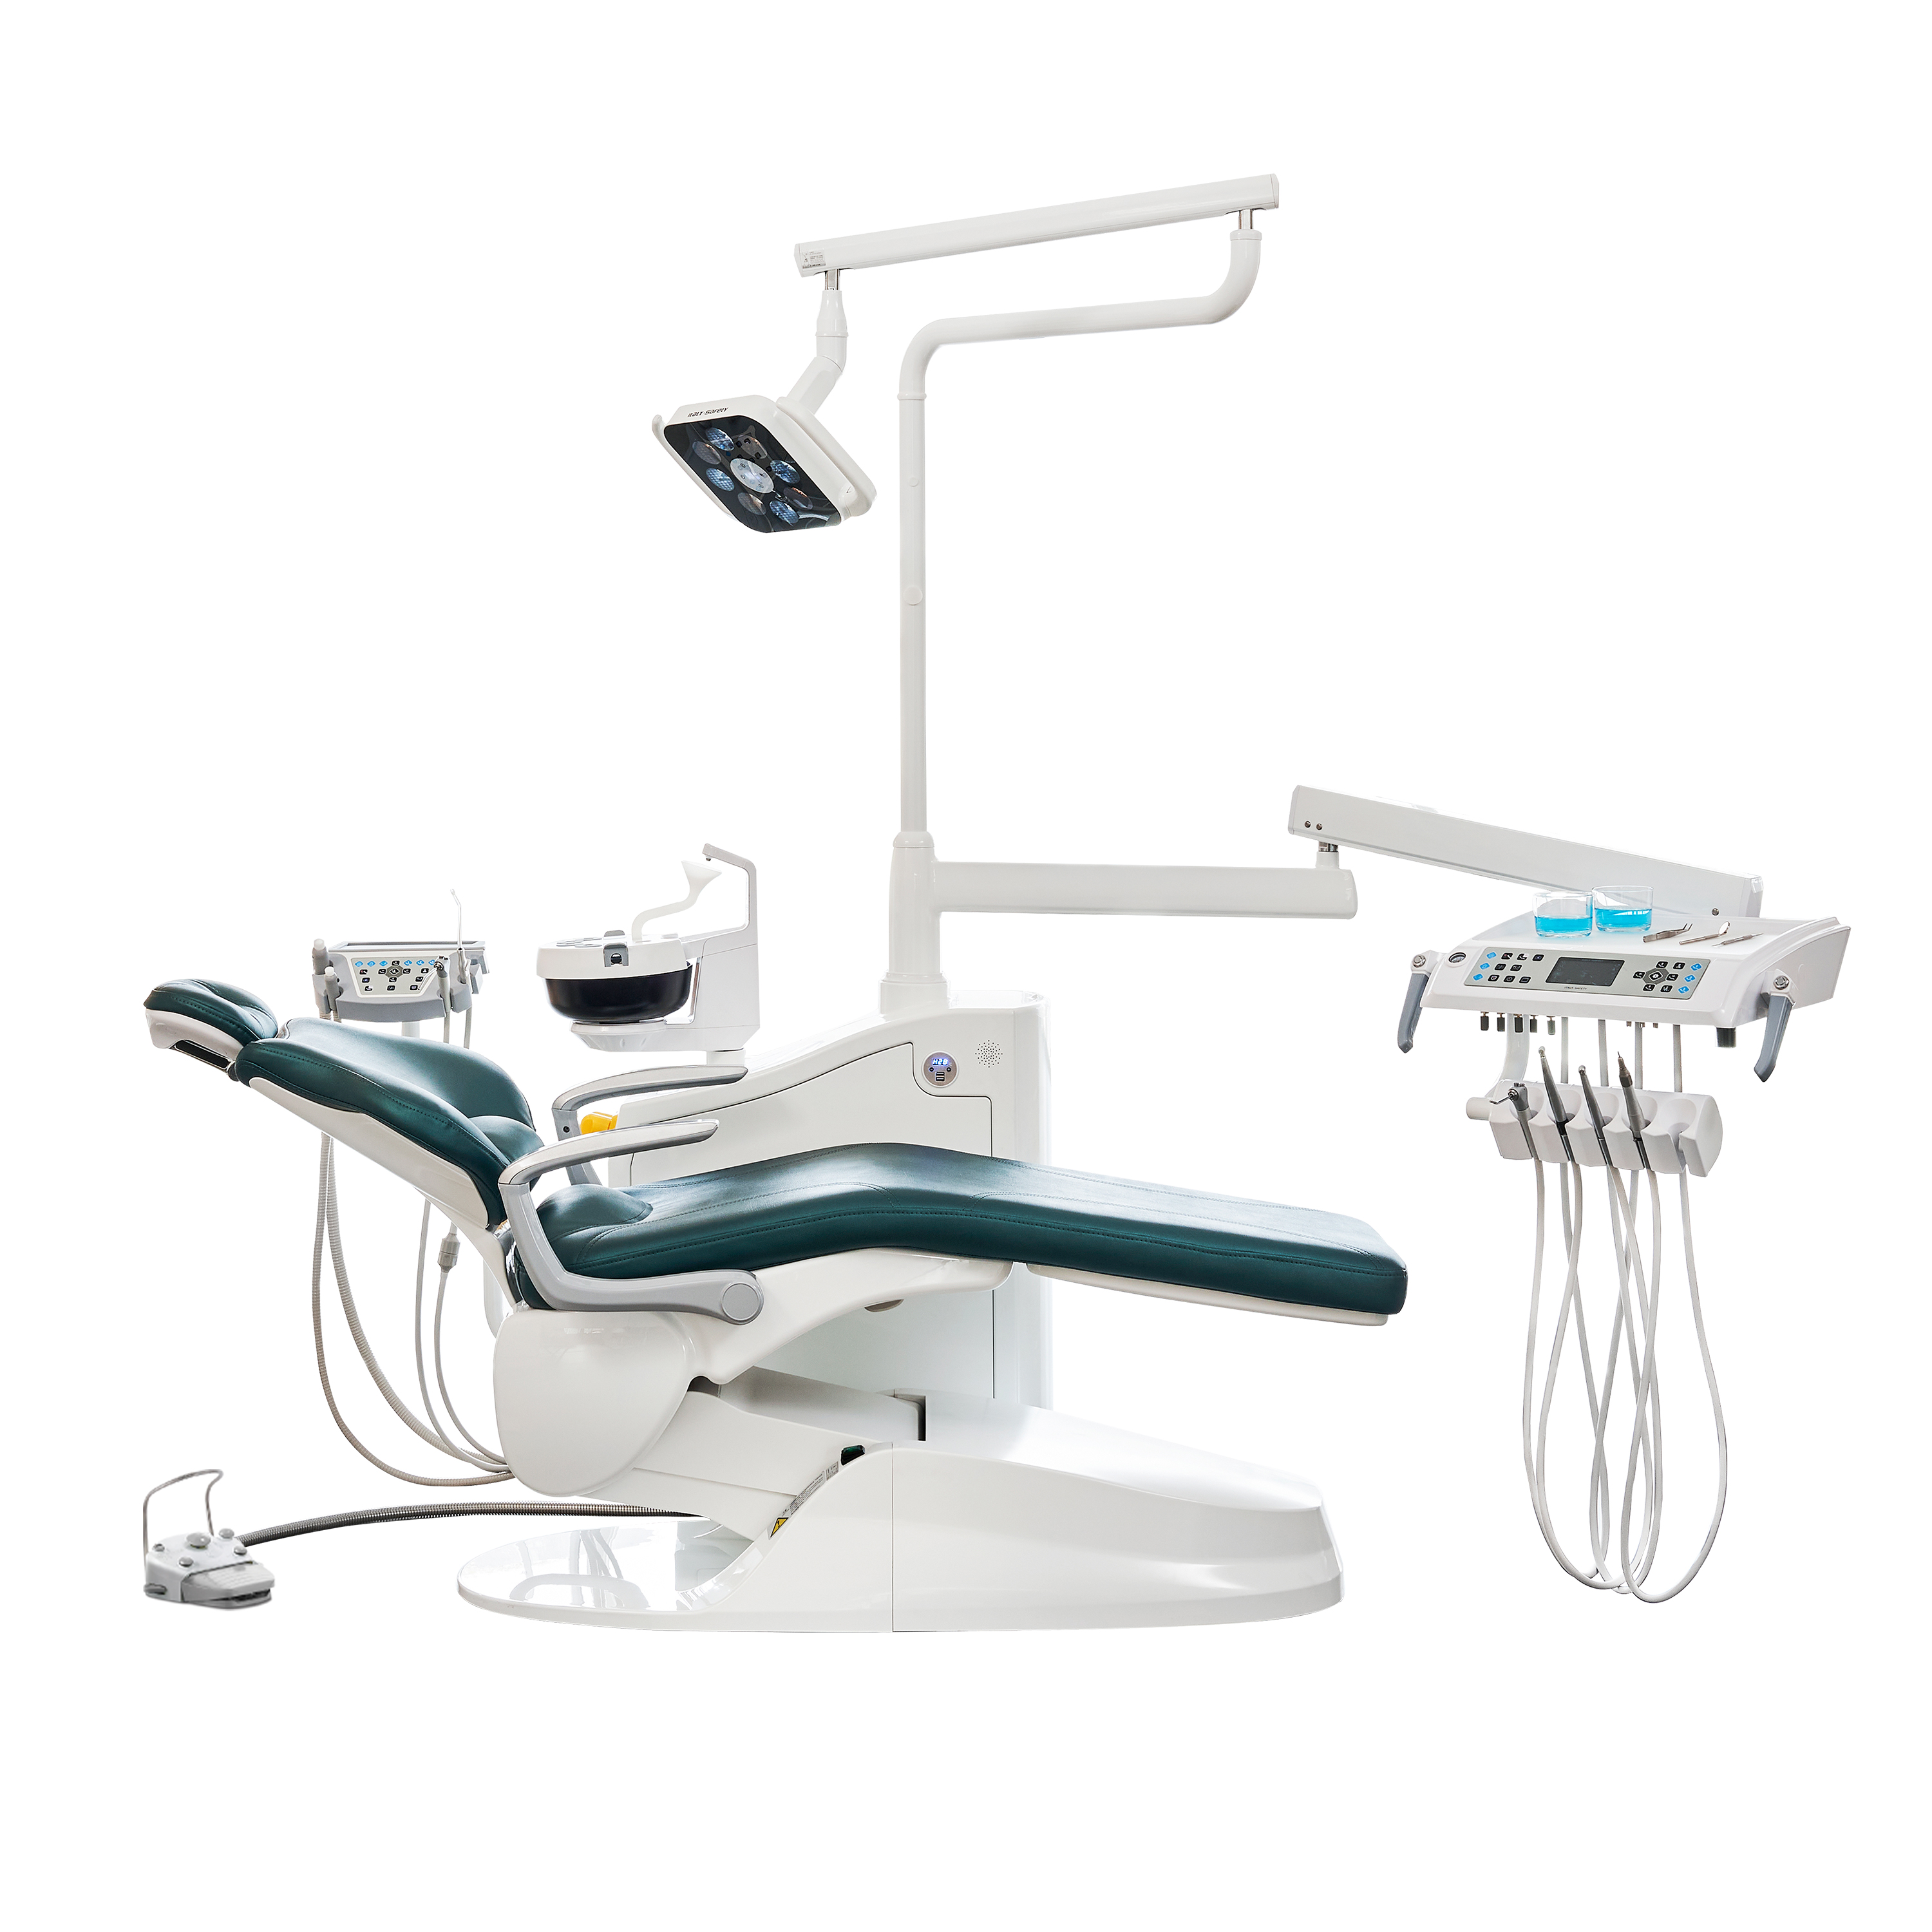 What Are The Main Parts Of The Dental Unit Chair?